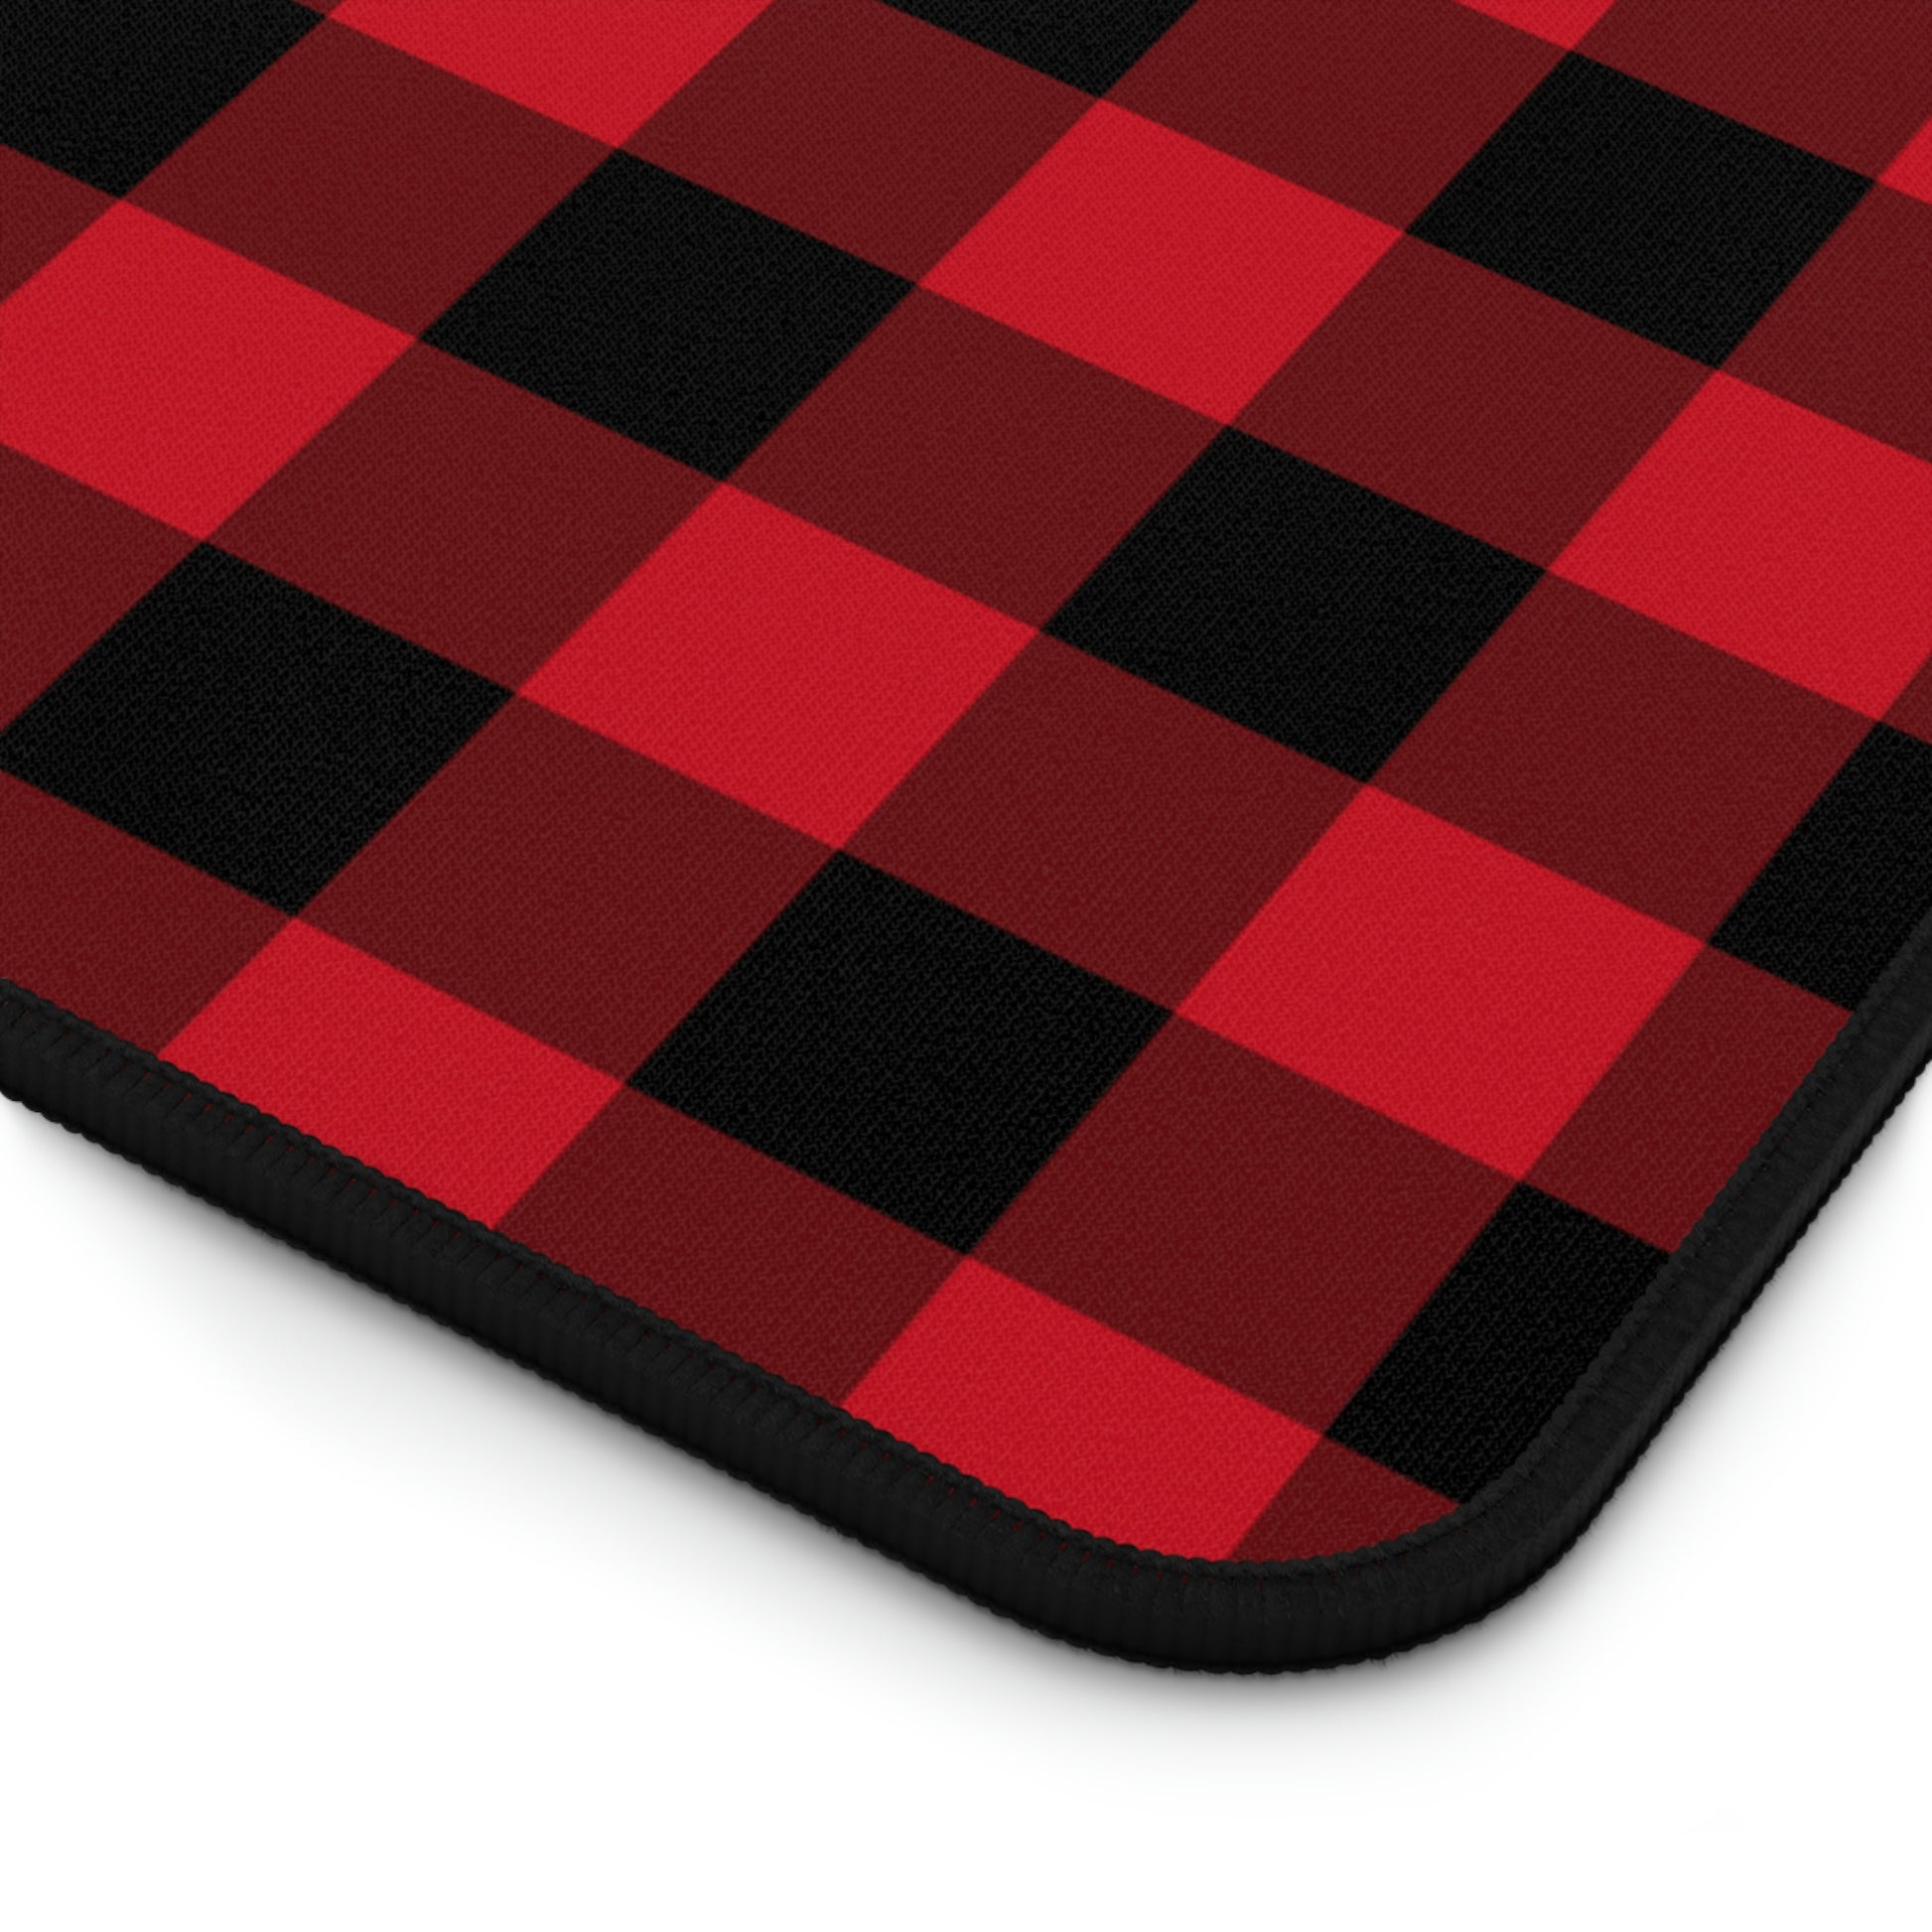 Red Black Buffalo Plaid Desk Mat, Check Checkered Holiday Large Small Wide Gaming Keyboard Mouse Unique Laptop Pad Starcove Fashion